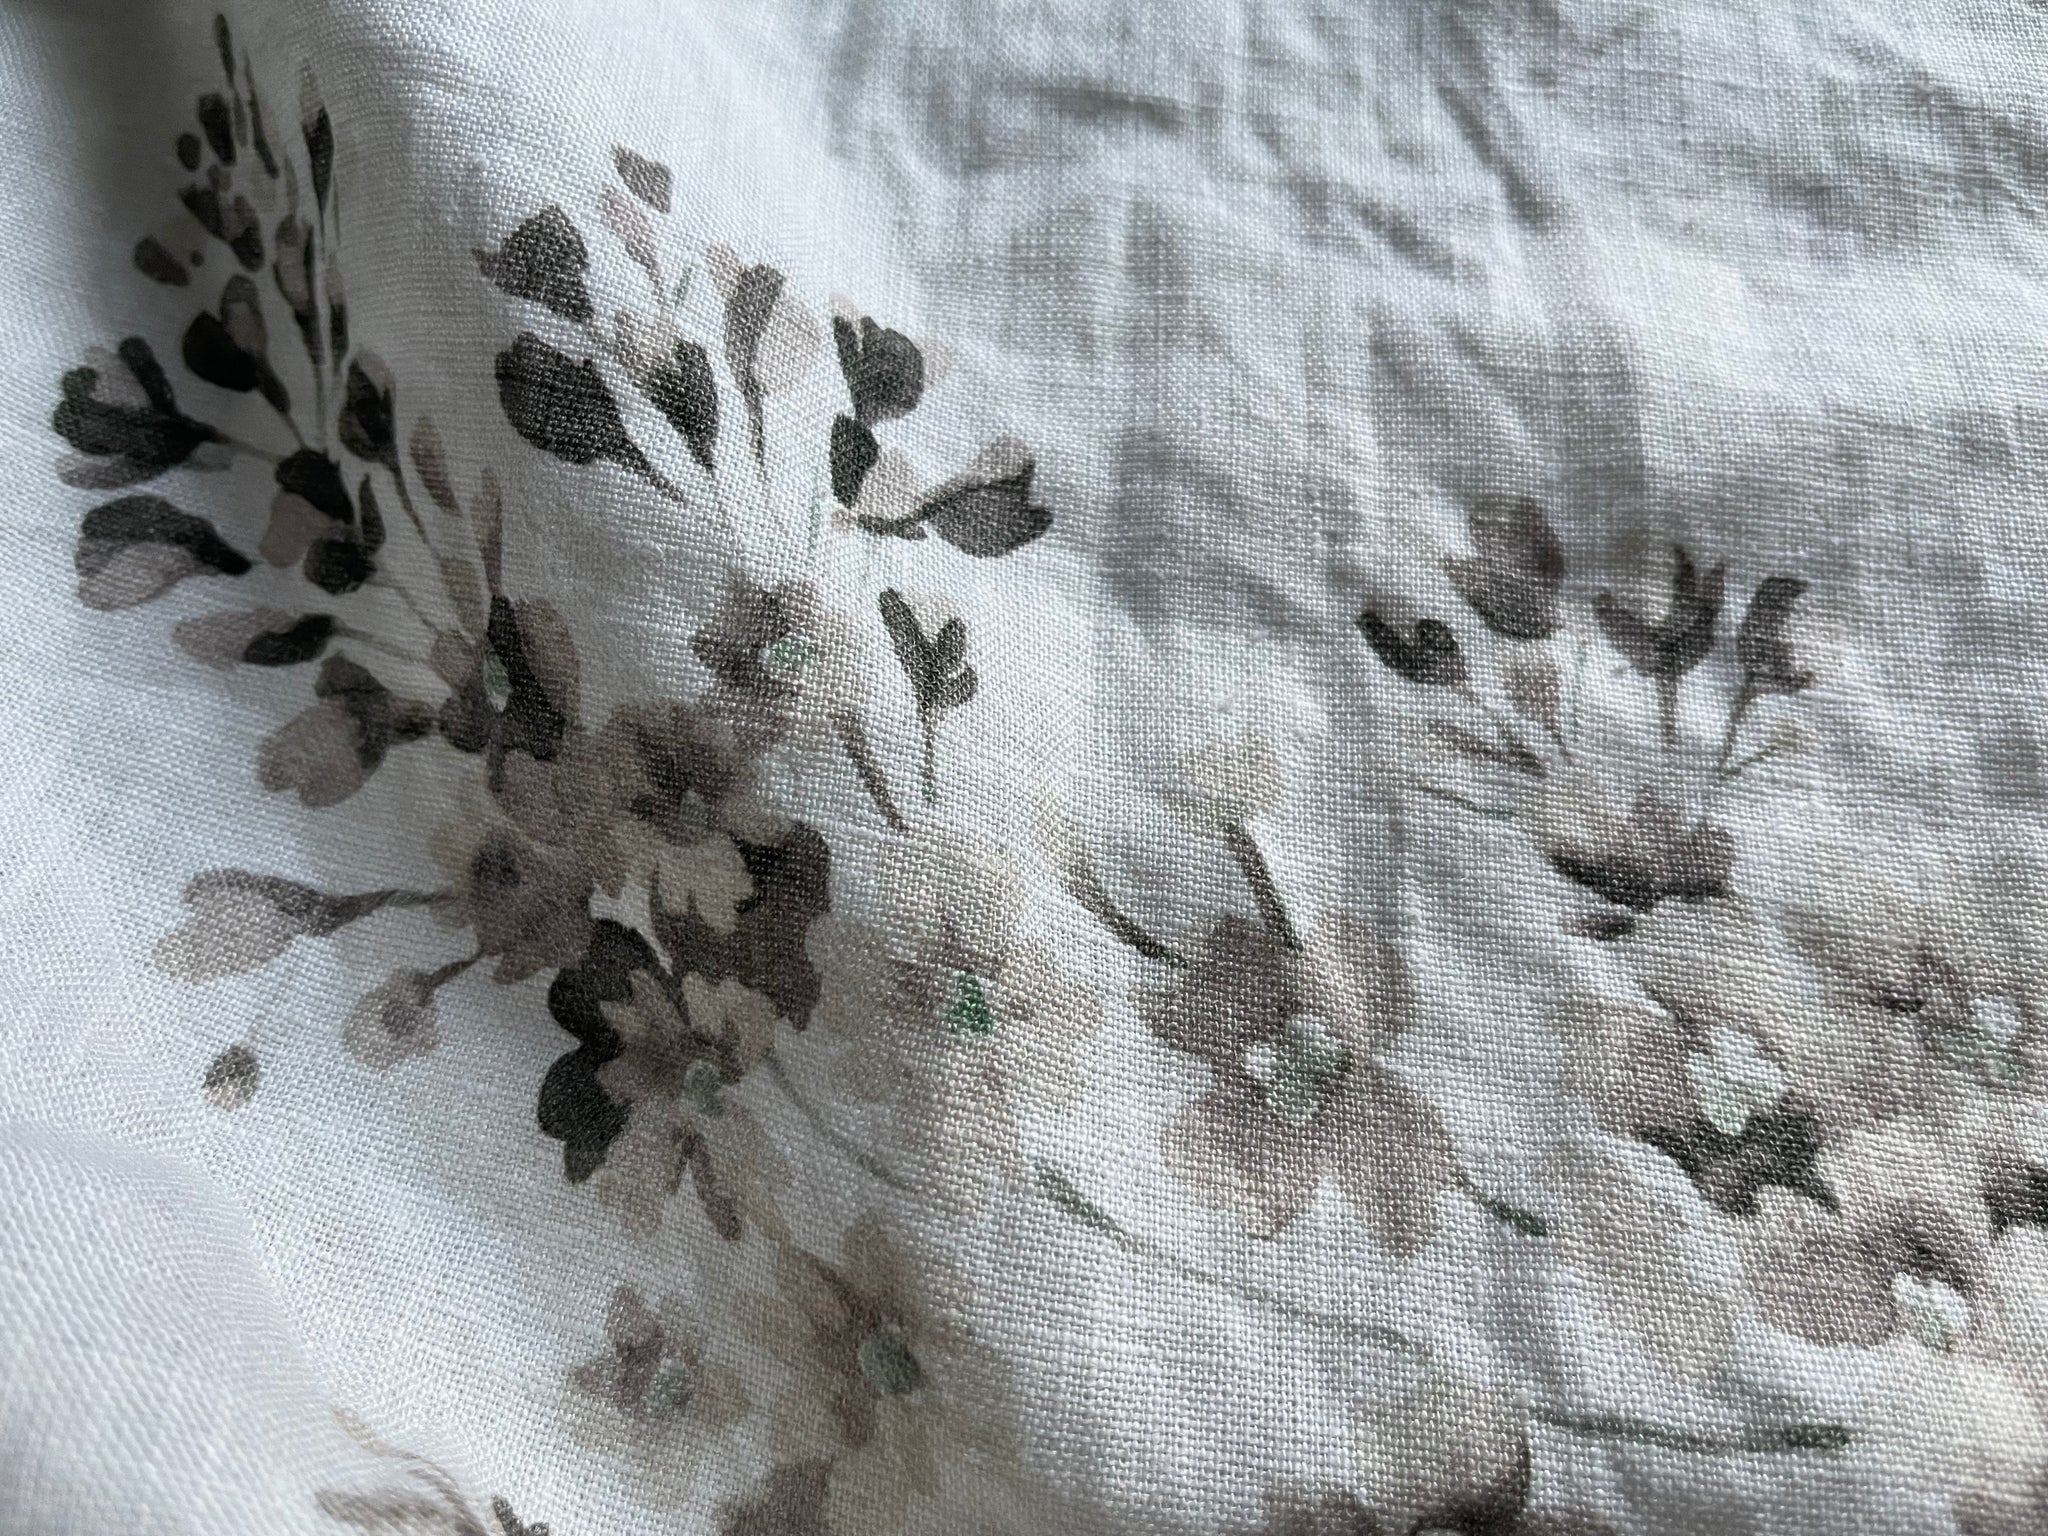 Peonies Floral Linen Fabric - Washed – Terra Textilia